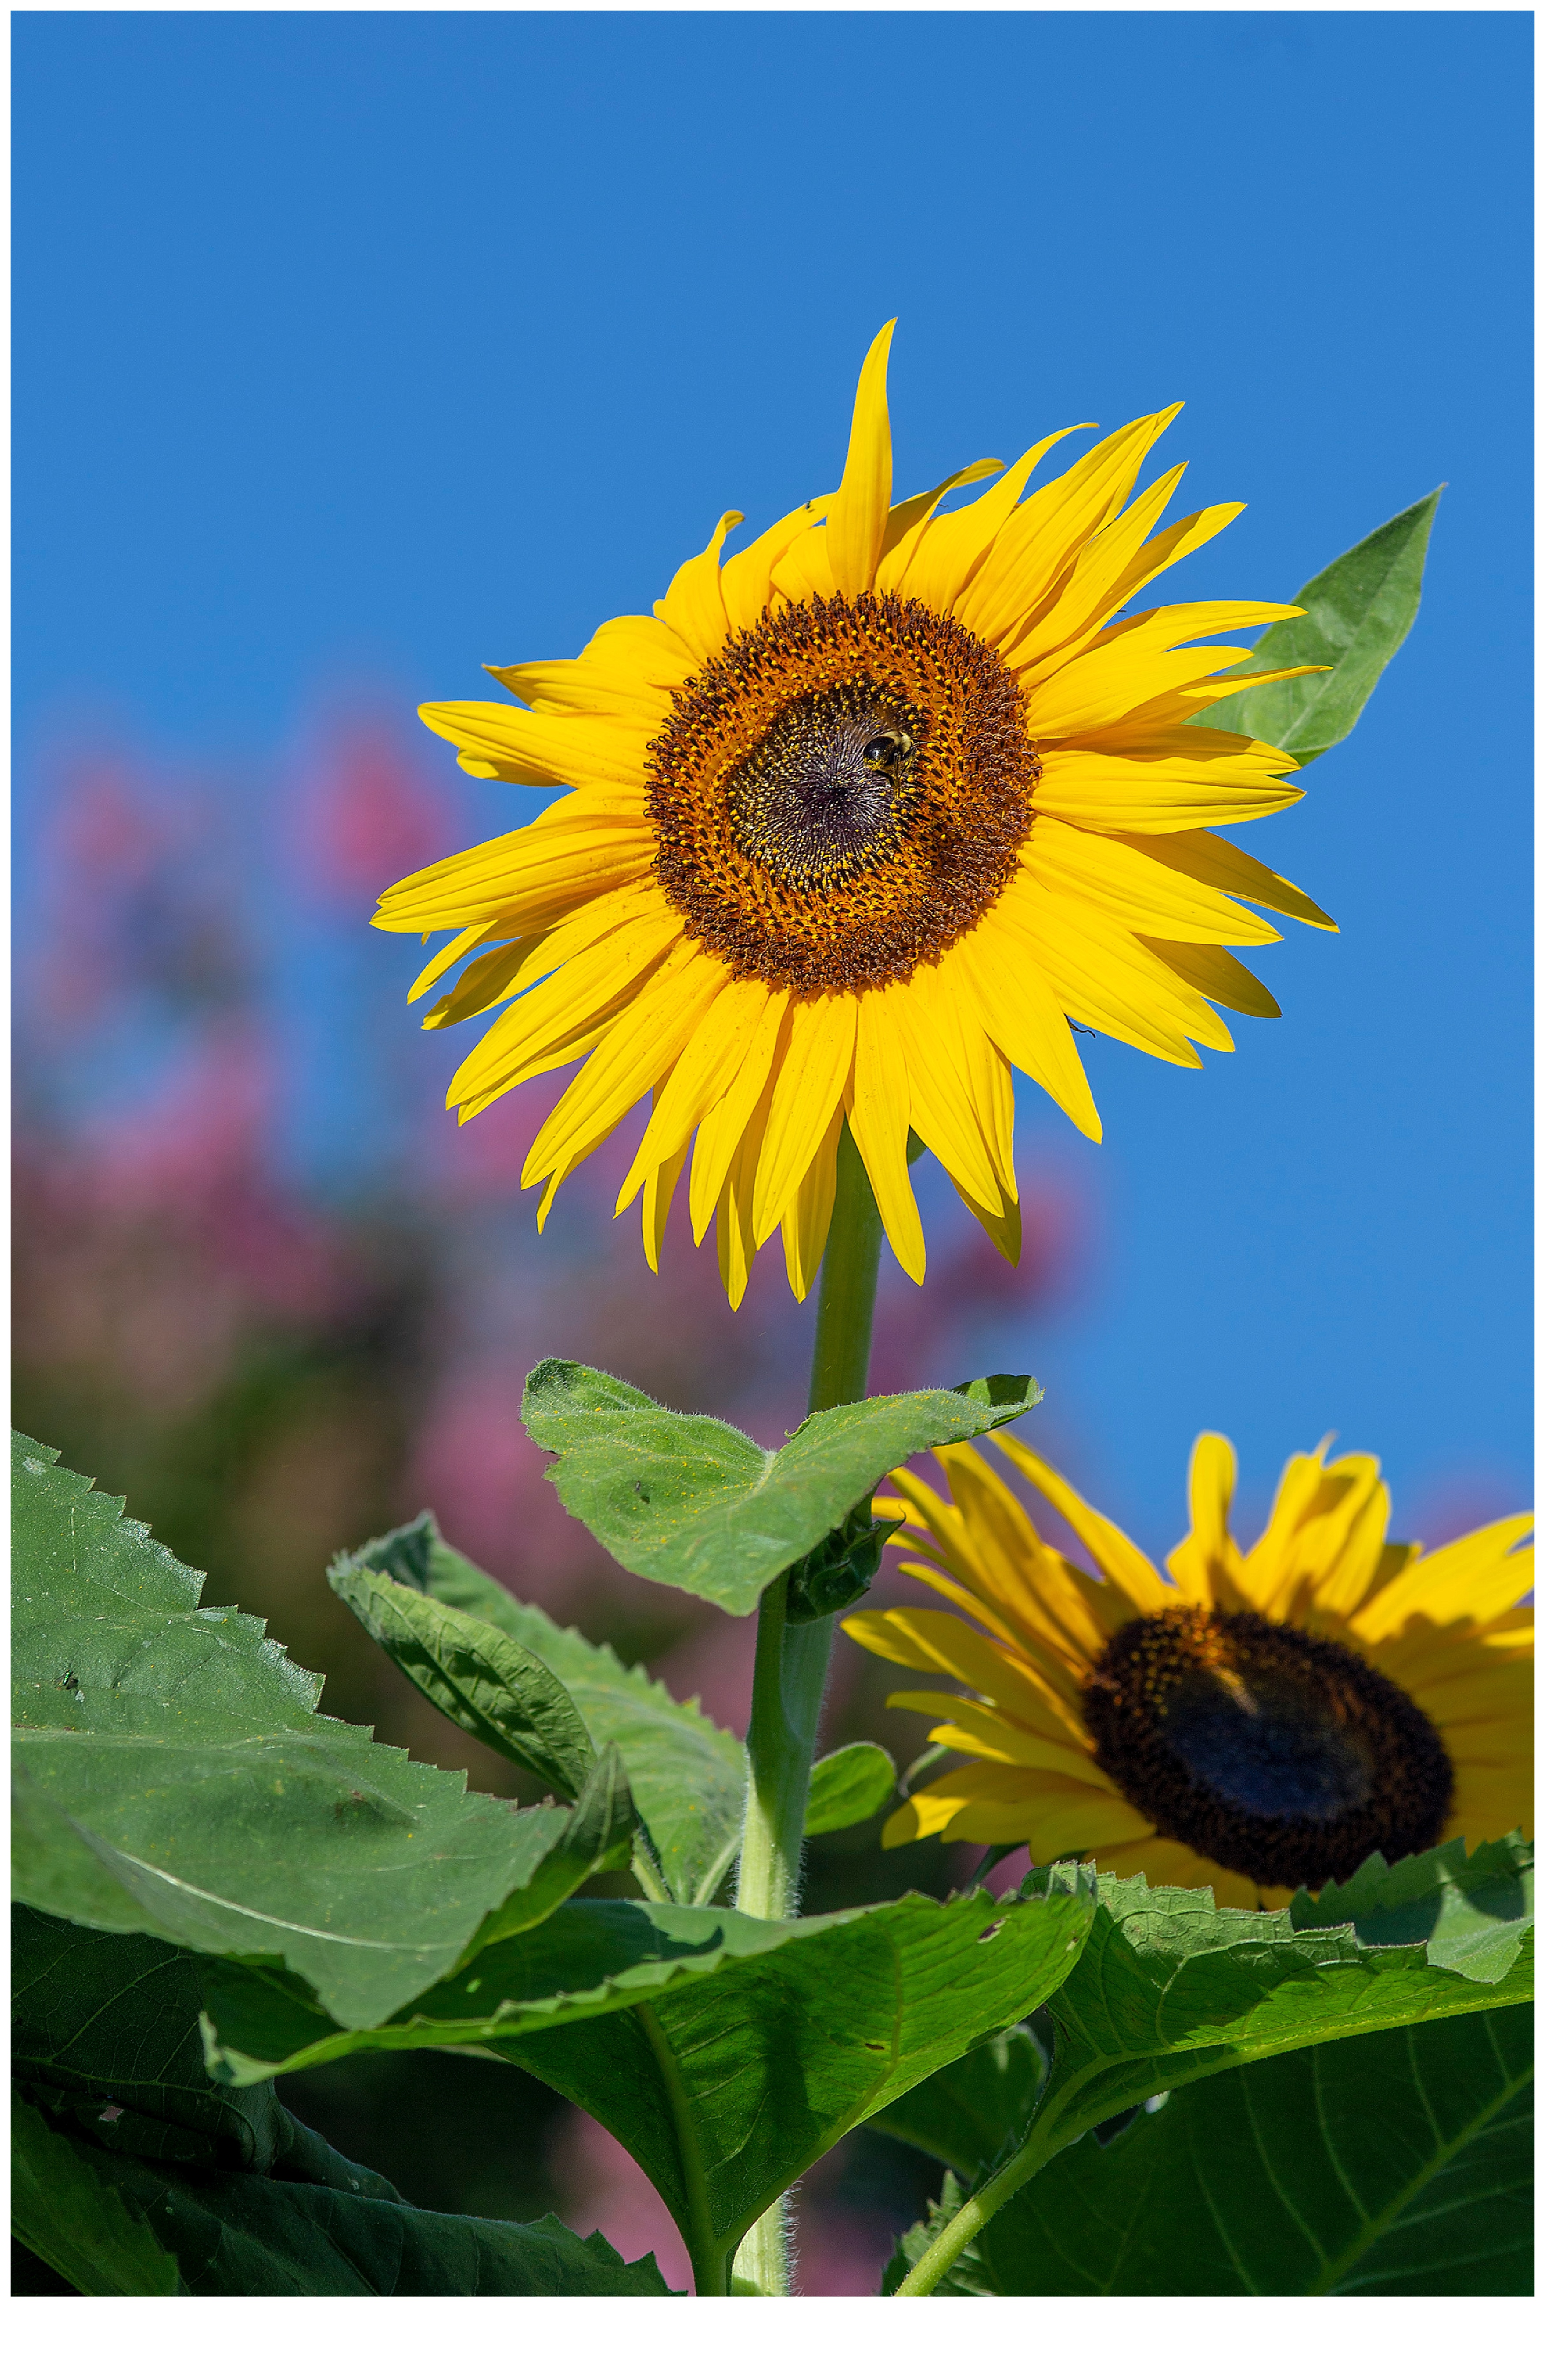 Yellow Sunflowers | Sunflower Prints for Sale – Natalie Kent Photography